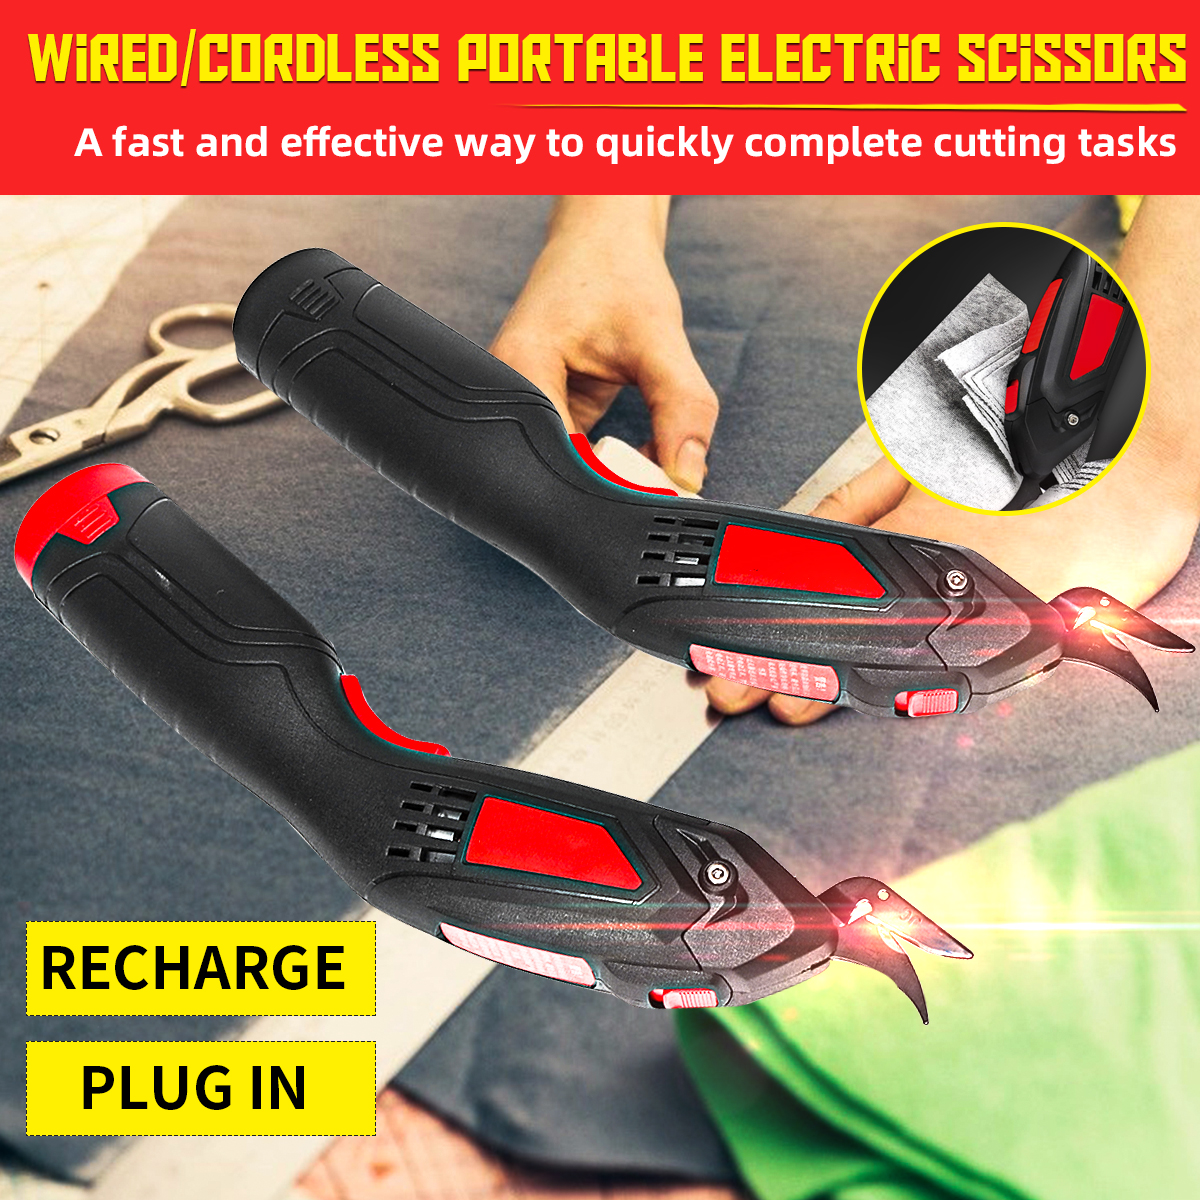 WiredCordless-Potable-Electric-Scissors-Leather-Fabric-Crafts-Cutting-Blade-Trimmer-1716218-1